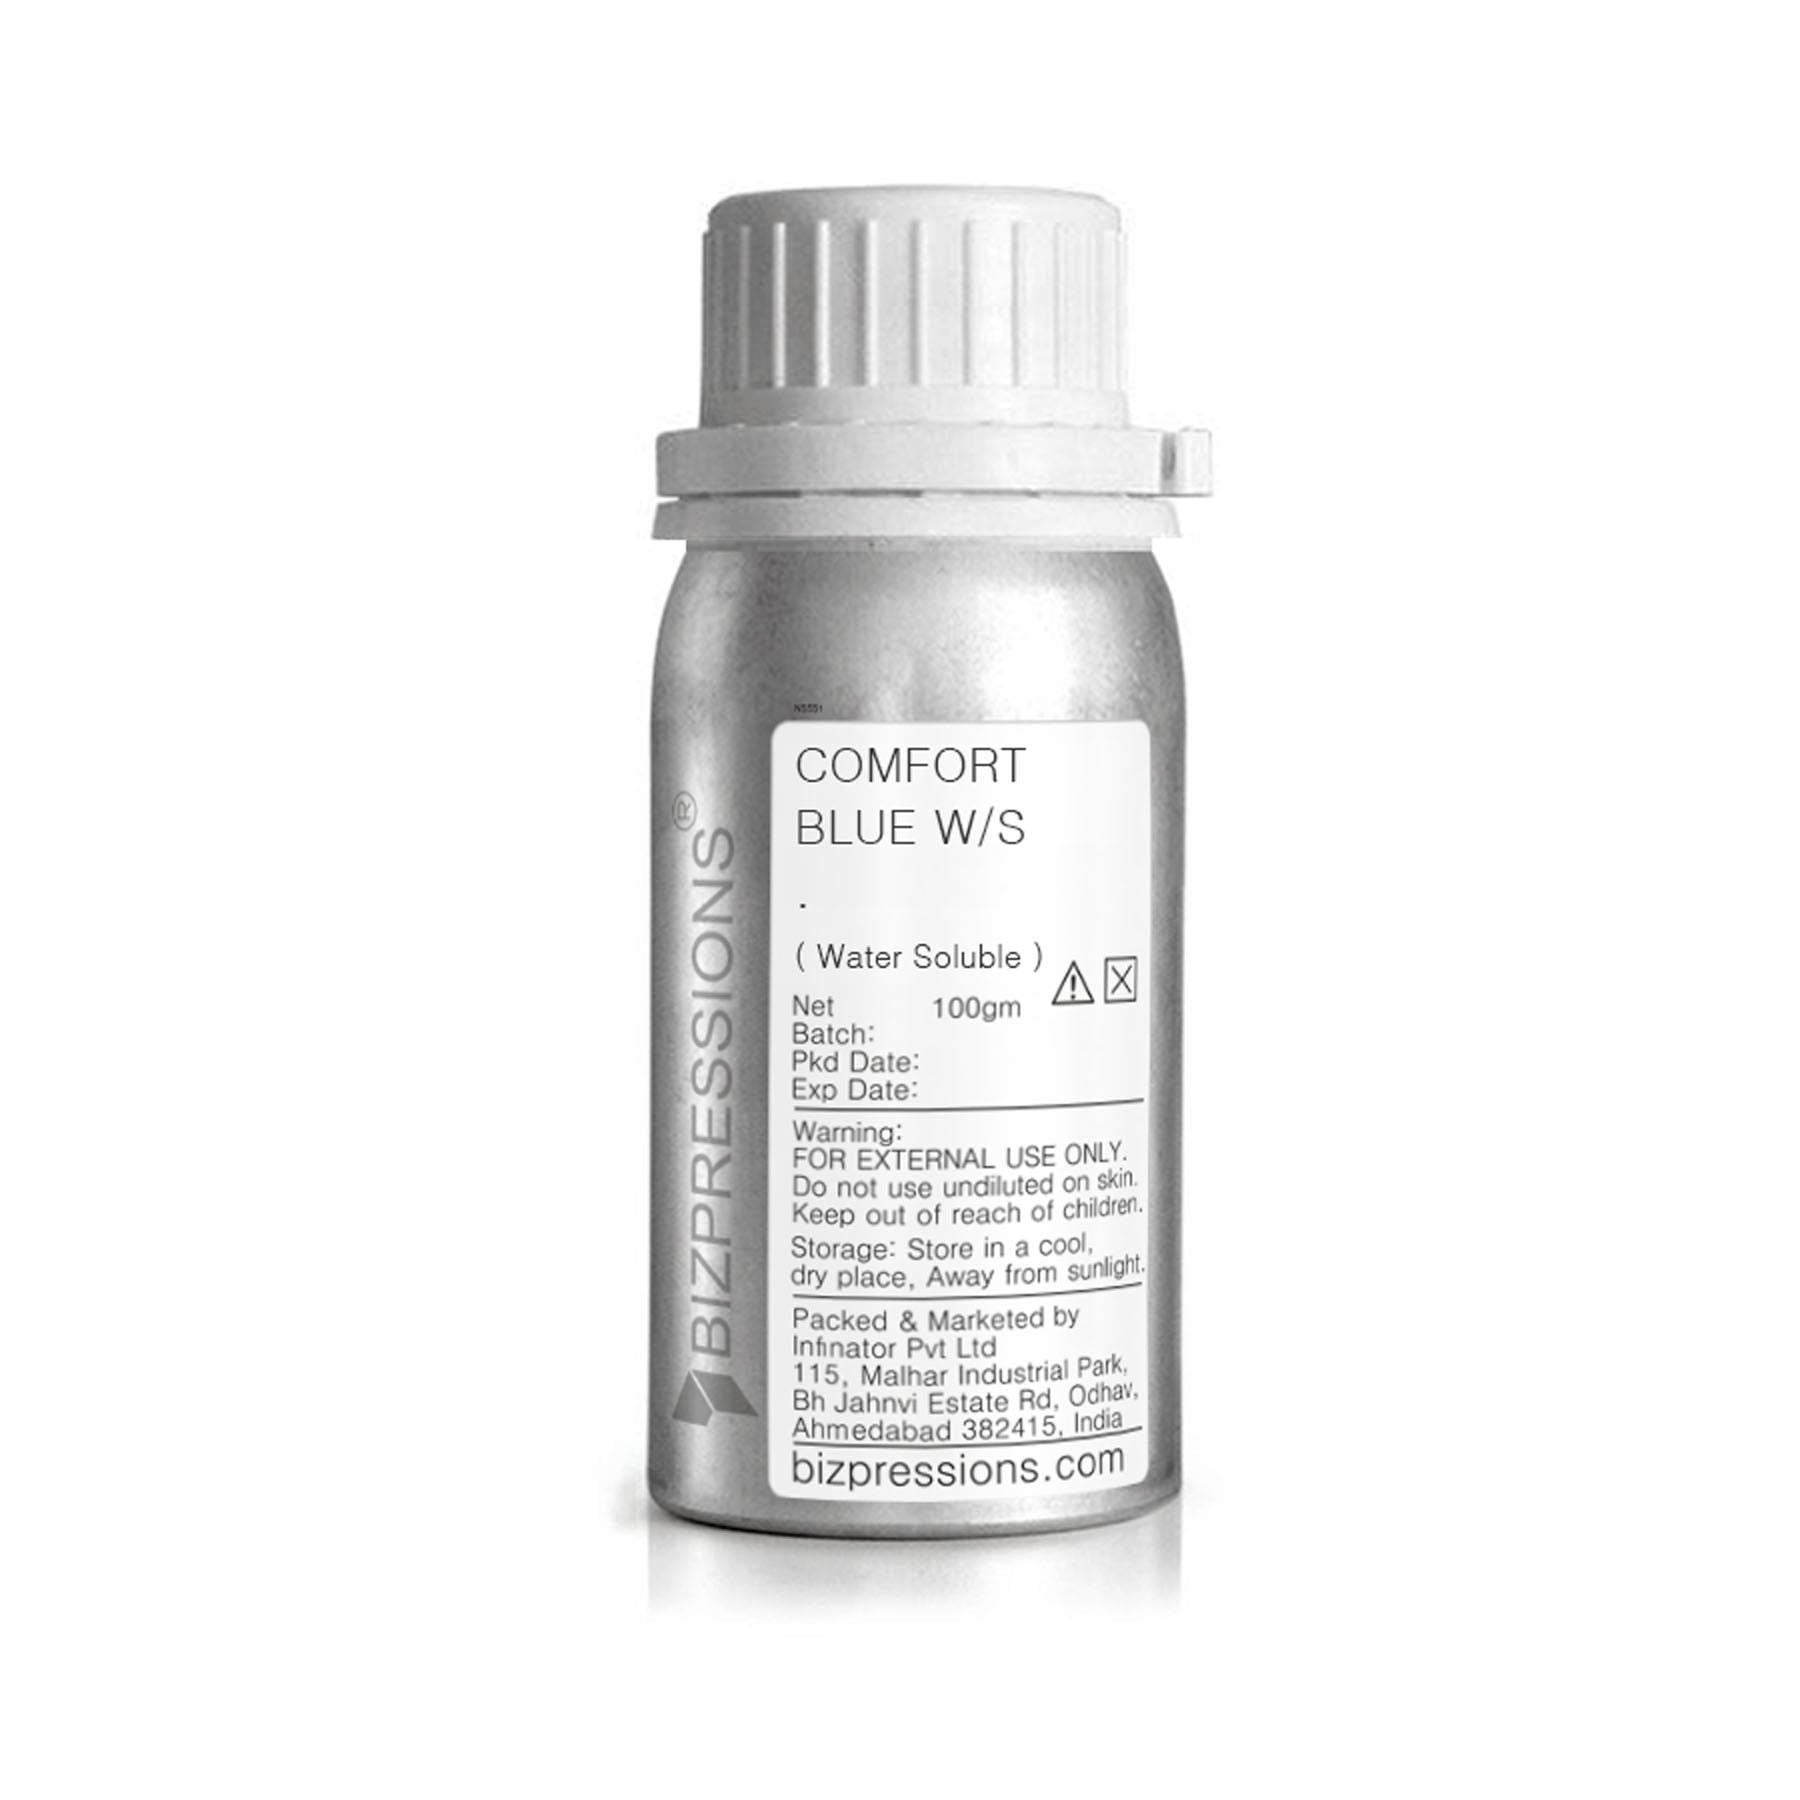 COMFORT BLUE W/S - Fragrance ( Water Soluble ) - 100 gm